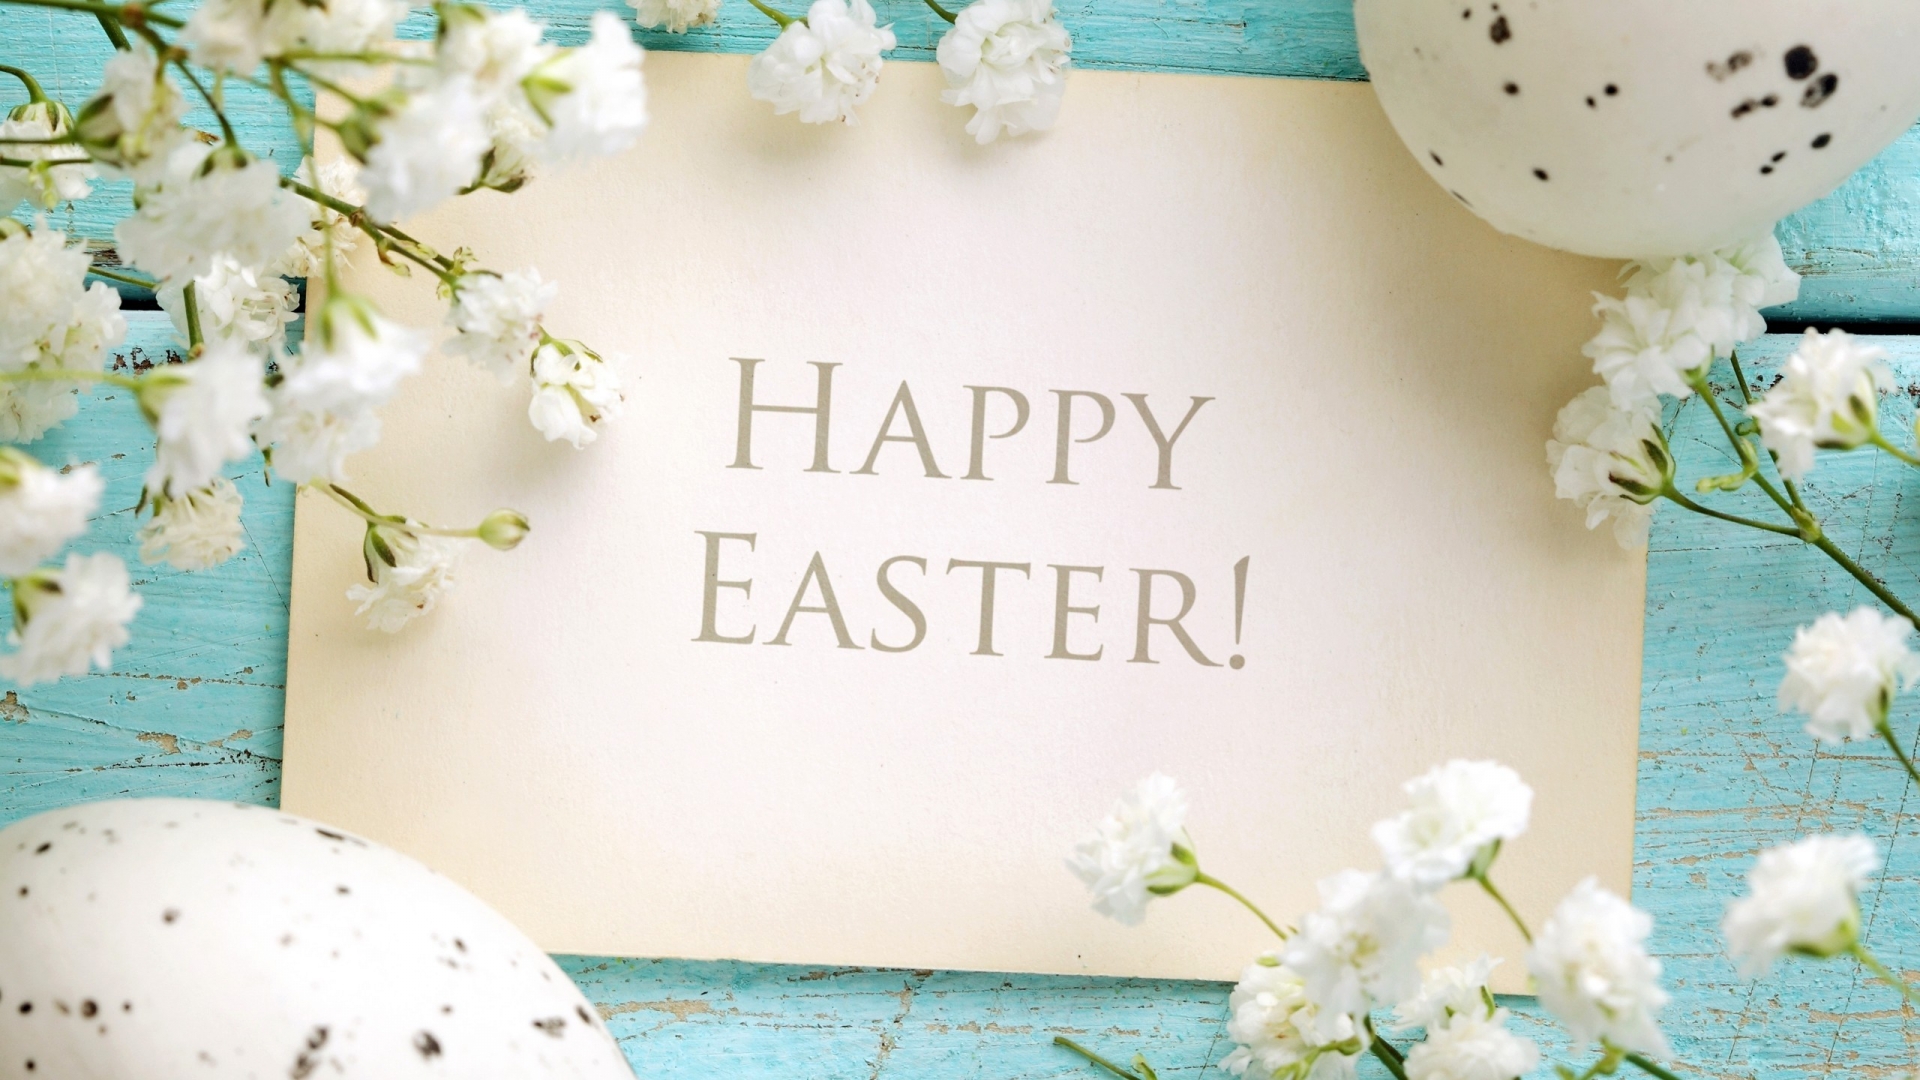 Happy Easter 2014 for 1920 x 1080 HDTV 1080p resolution